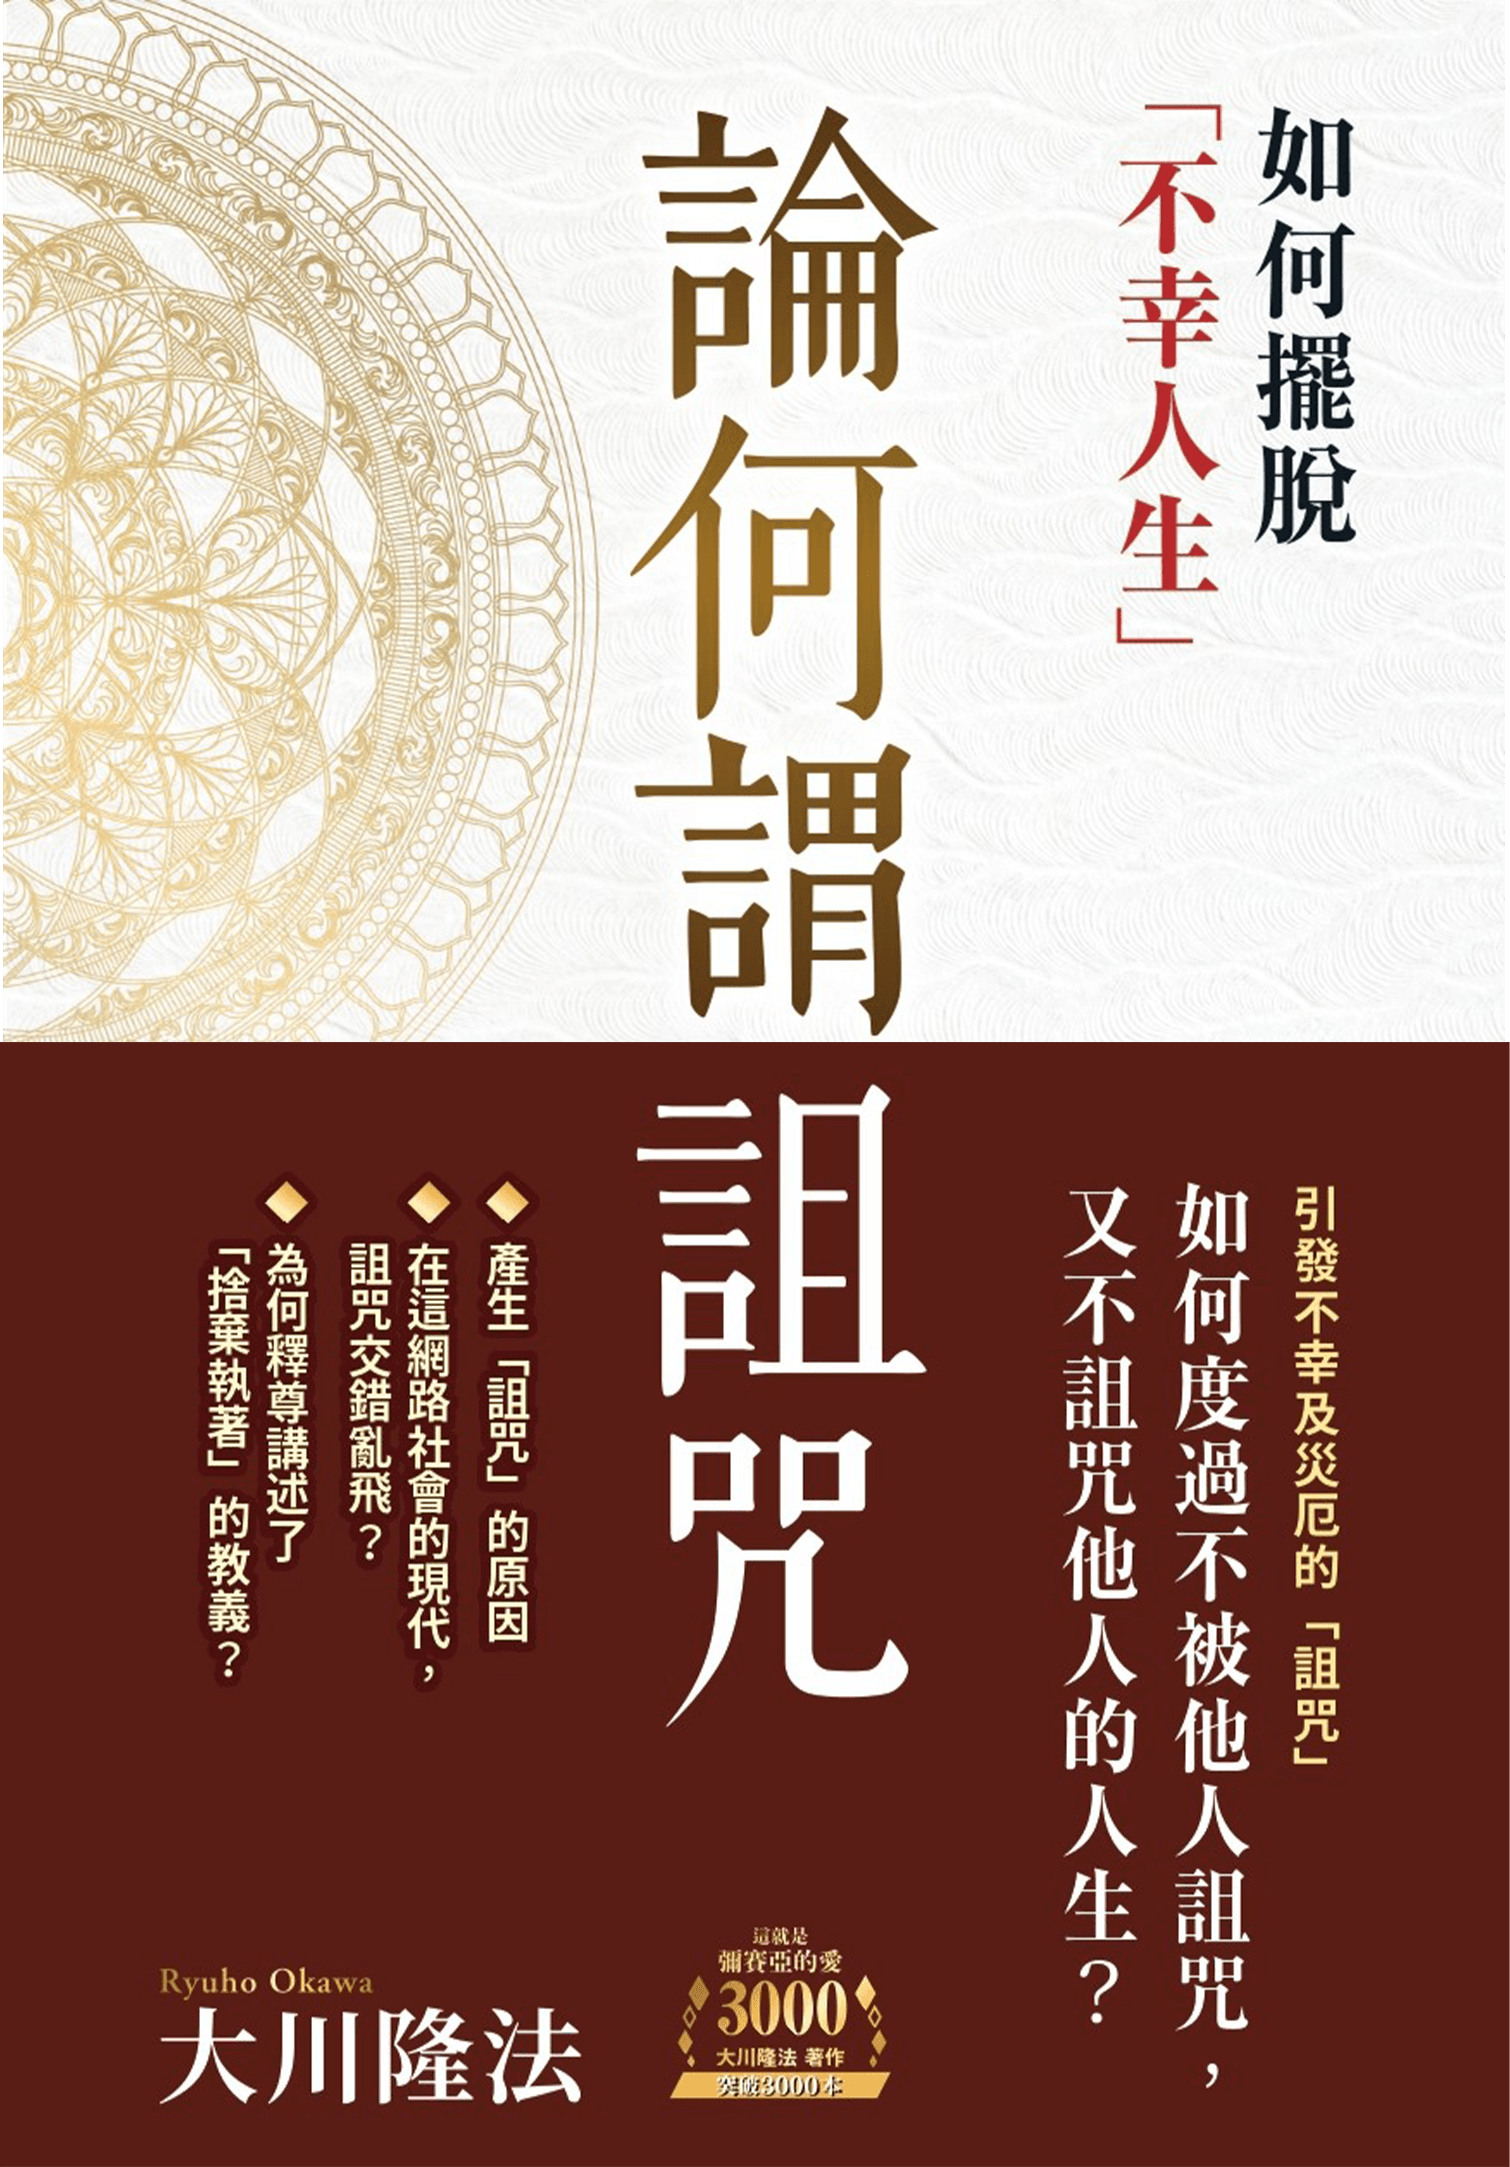 Book, The Spiritual Truth About Curses and Spells : How to Get Out of an Unhappy Life, Ryuho Okawa, Chinese Traditional - IRH Press International